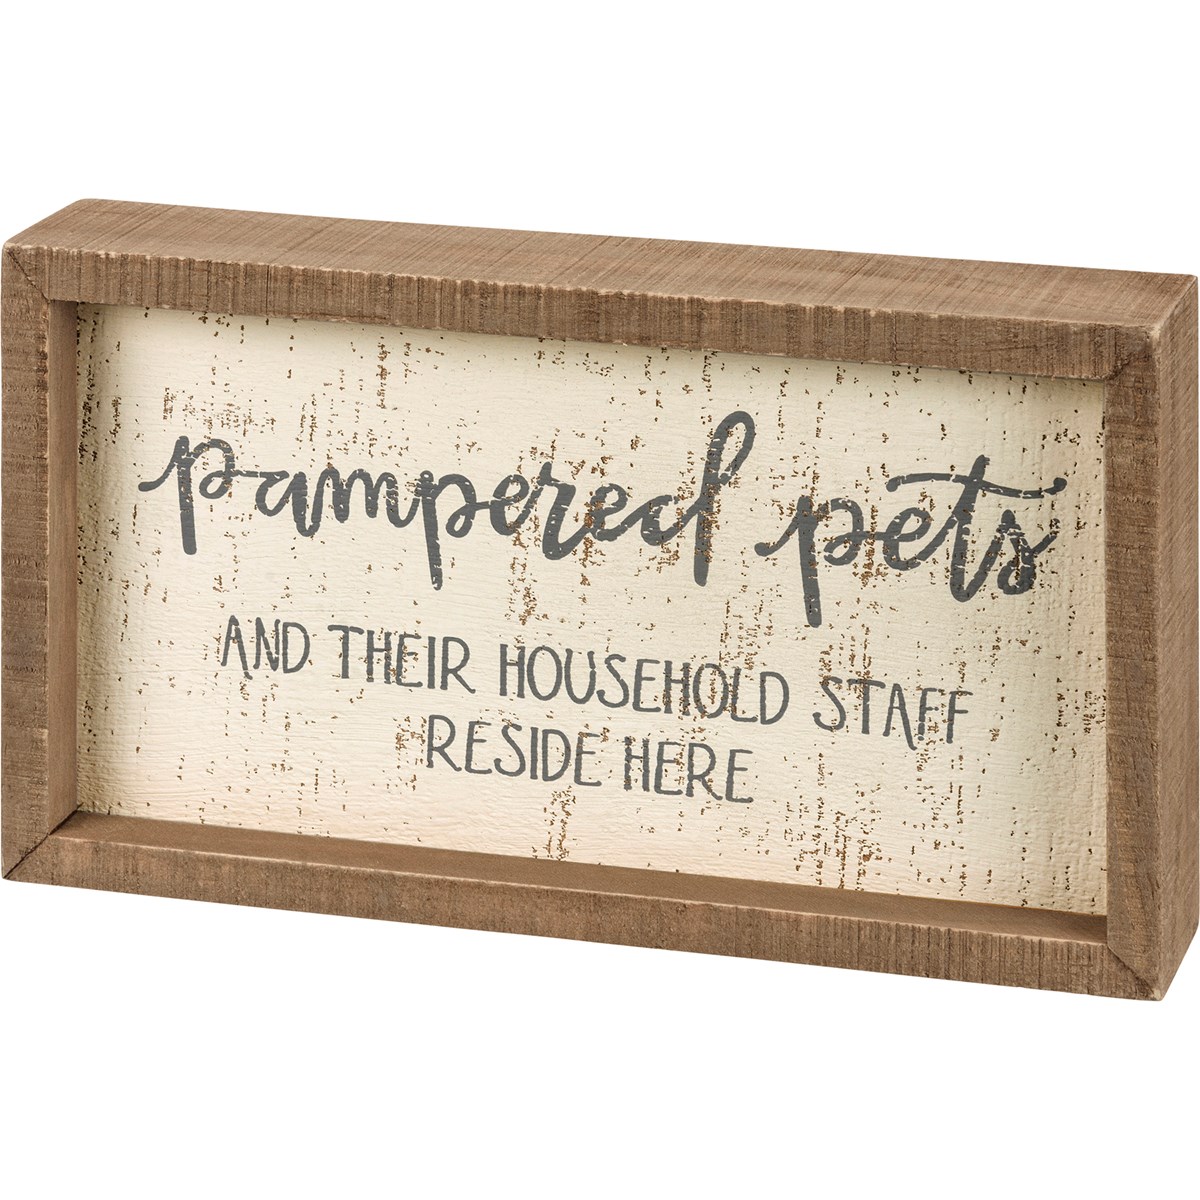 Inset Box Sign - Pampered Pets And Their Staff - 9" x 5" x 1.75" - Wood